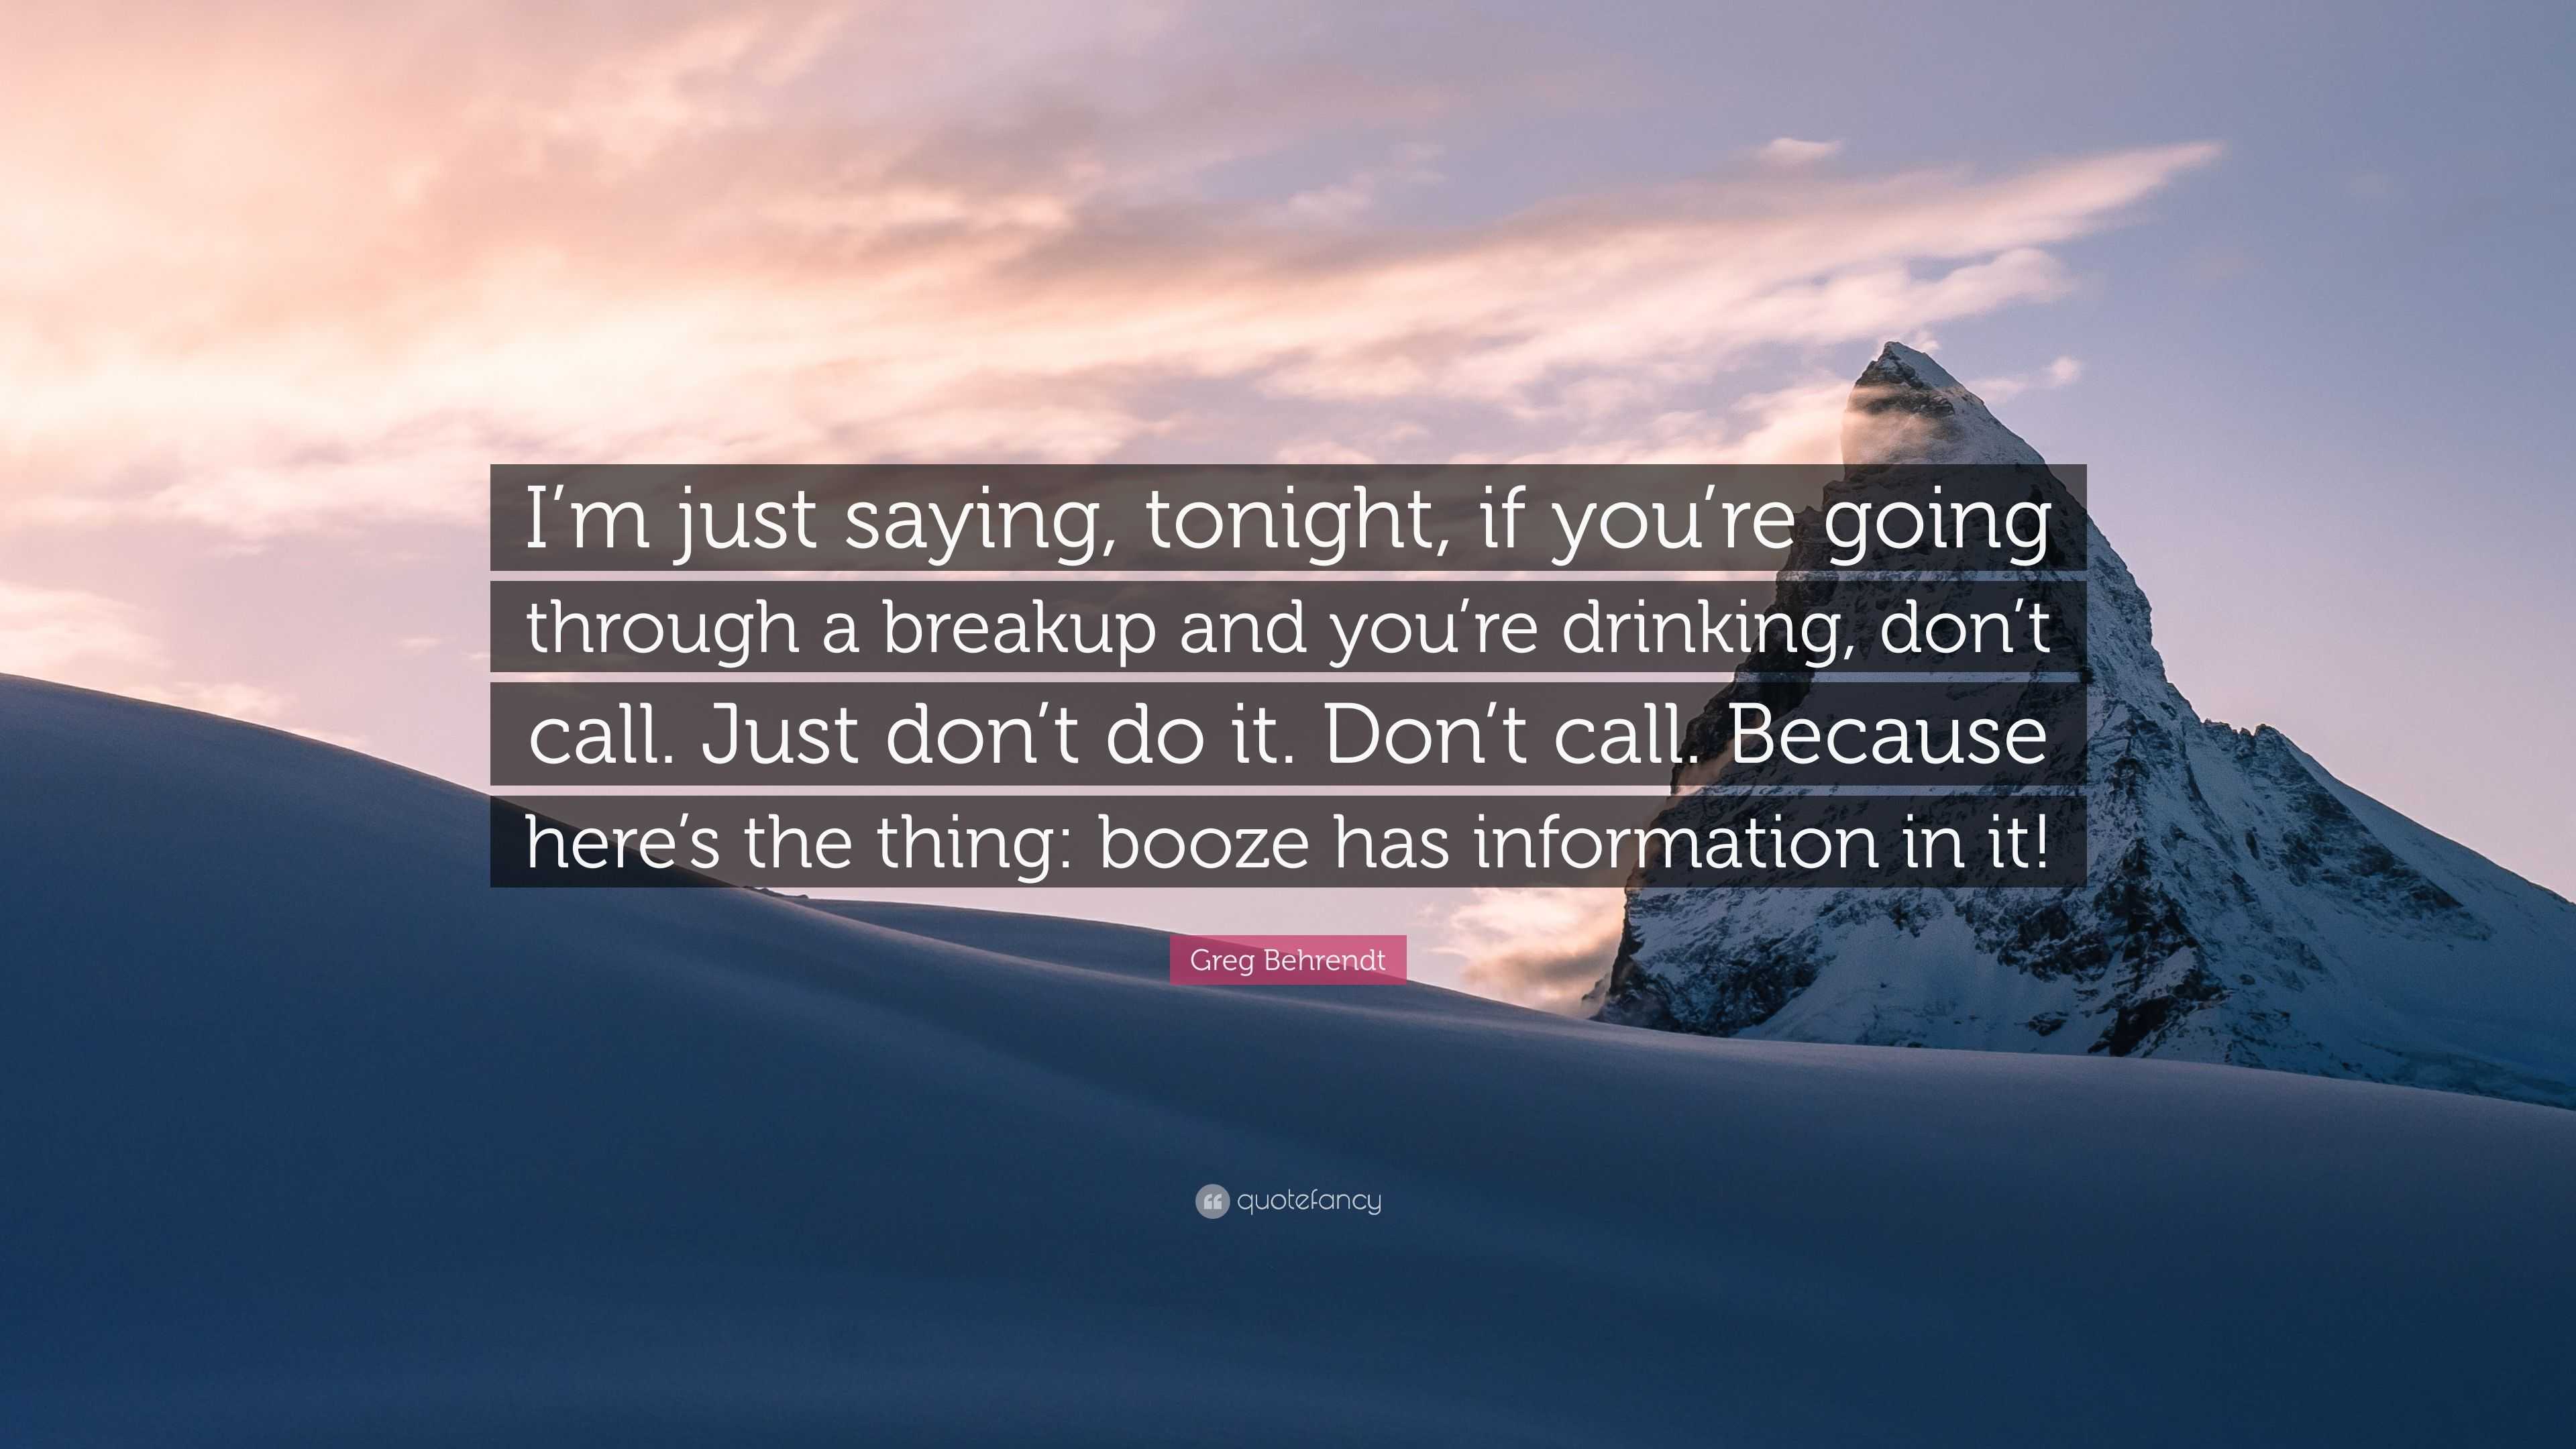 Greg Behrendt Quote: “I'm just saying, tonight, if you're going through a  breakup and you're drinking, don't call. Just don't do it. Don't cal”